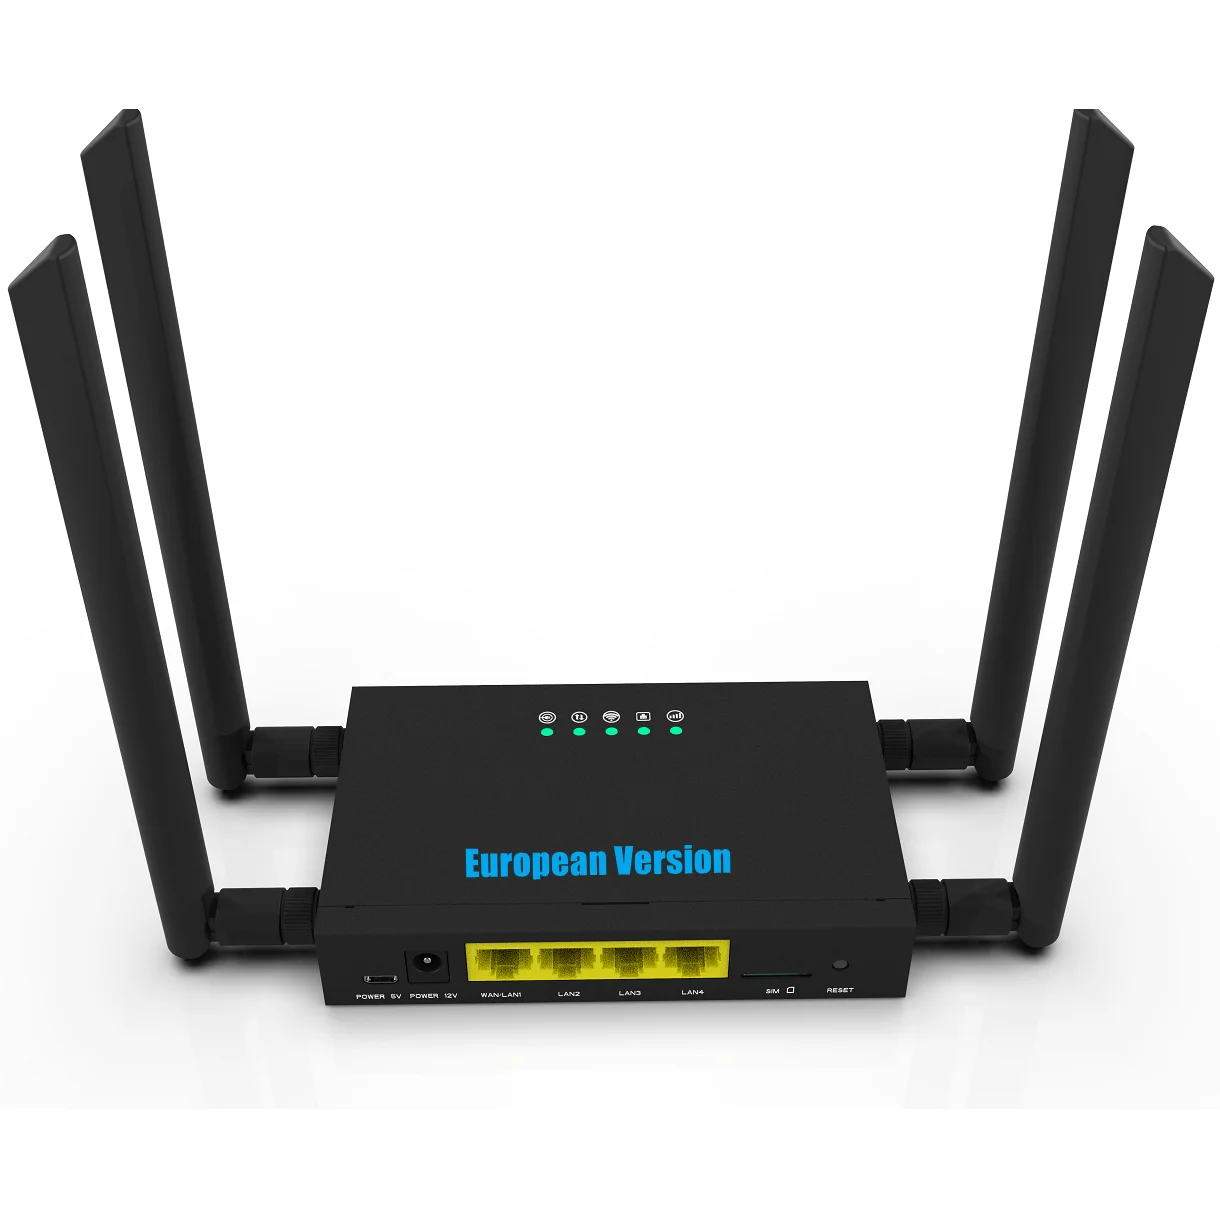 

Industrial Compact Unlocked M2M 4G LTE CPE 300mbps CAT4 WiFi Wireless Router With 4 External Antennas SIM Card Slot For 32 Users